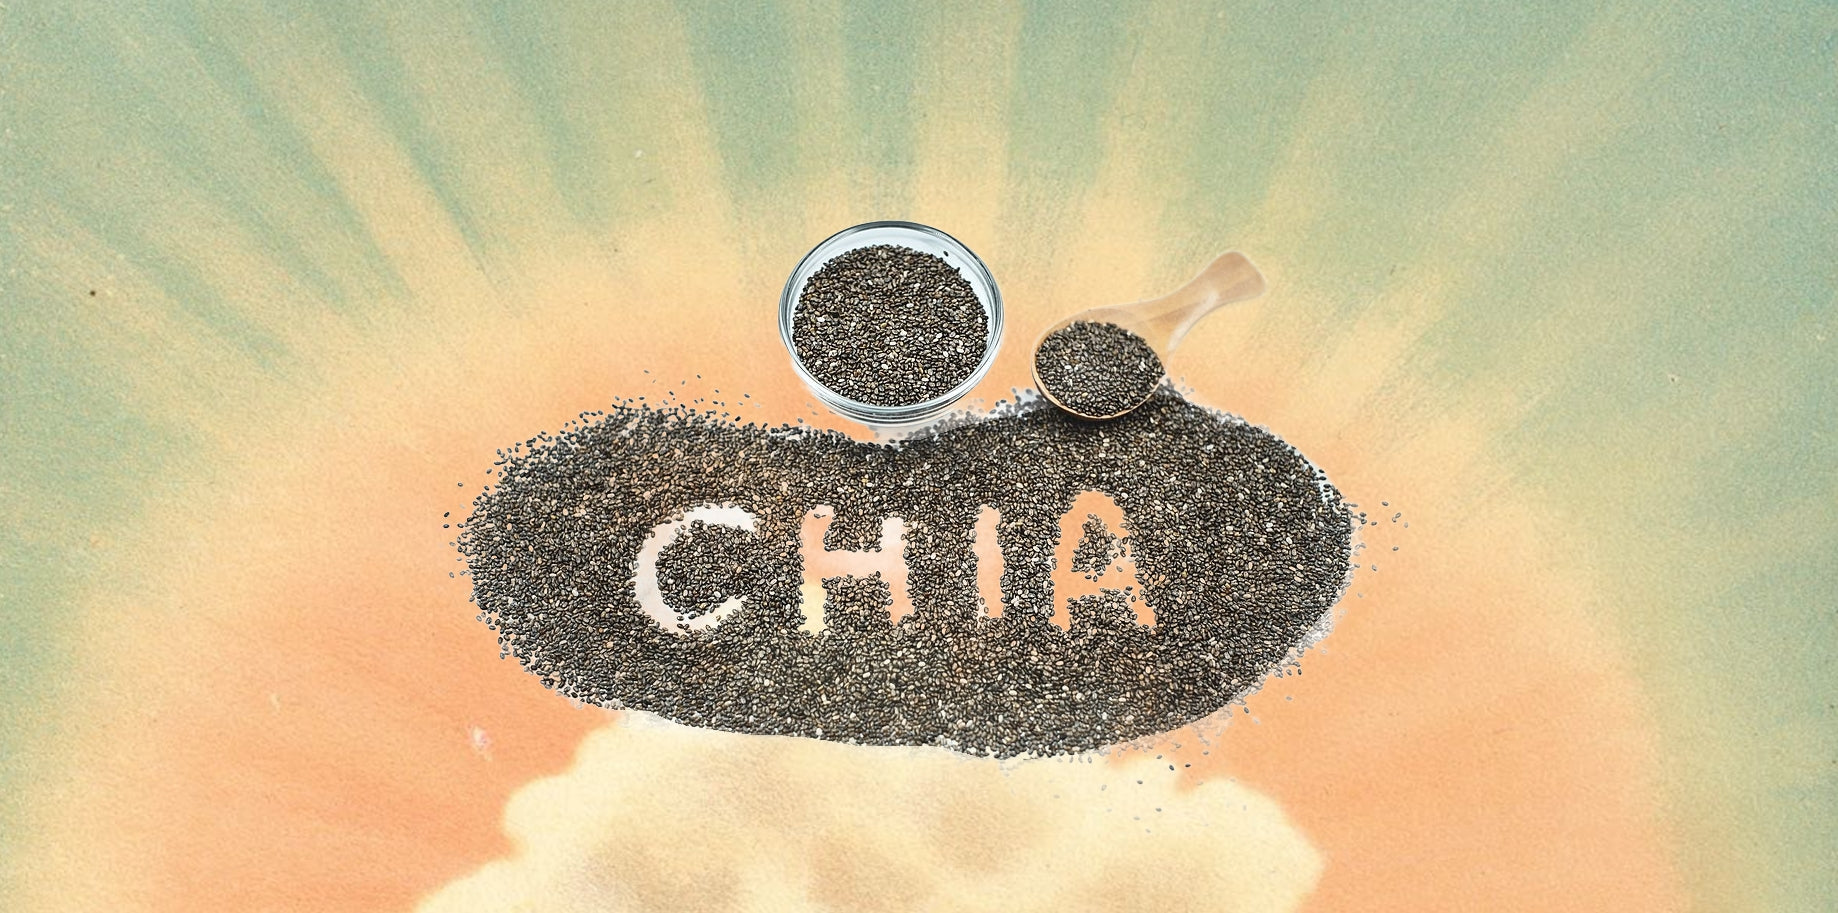 An Ancient Superfood Called Chia